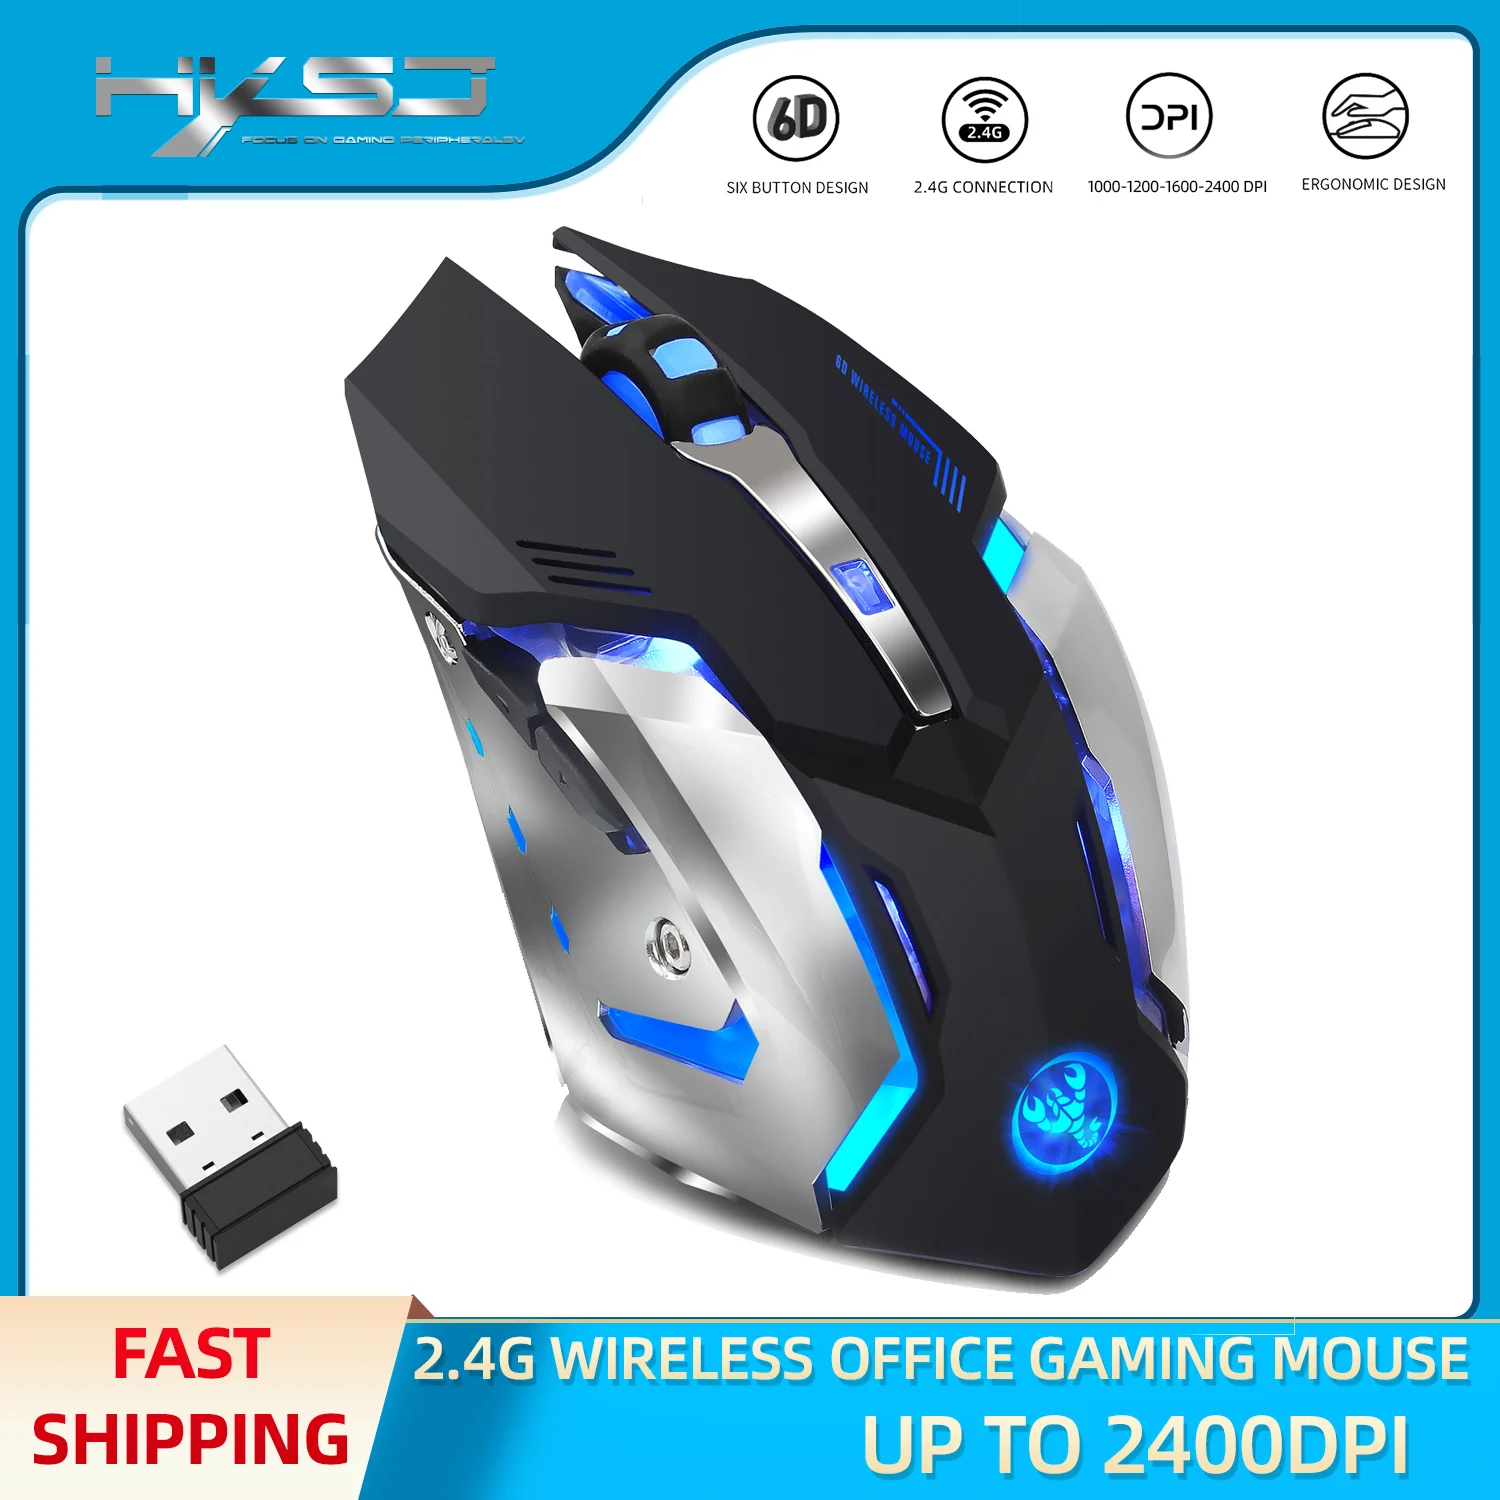 

HXSJ M10 Wireless Mouse 2.4GHz Gaming Mouse Ergonomic Design Gaming Mouse 2400DPI USB Mice For Laptop PC